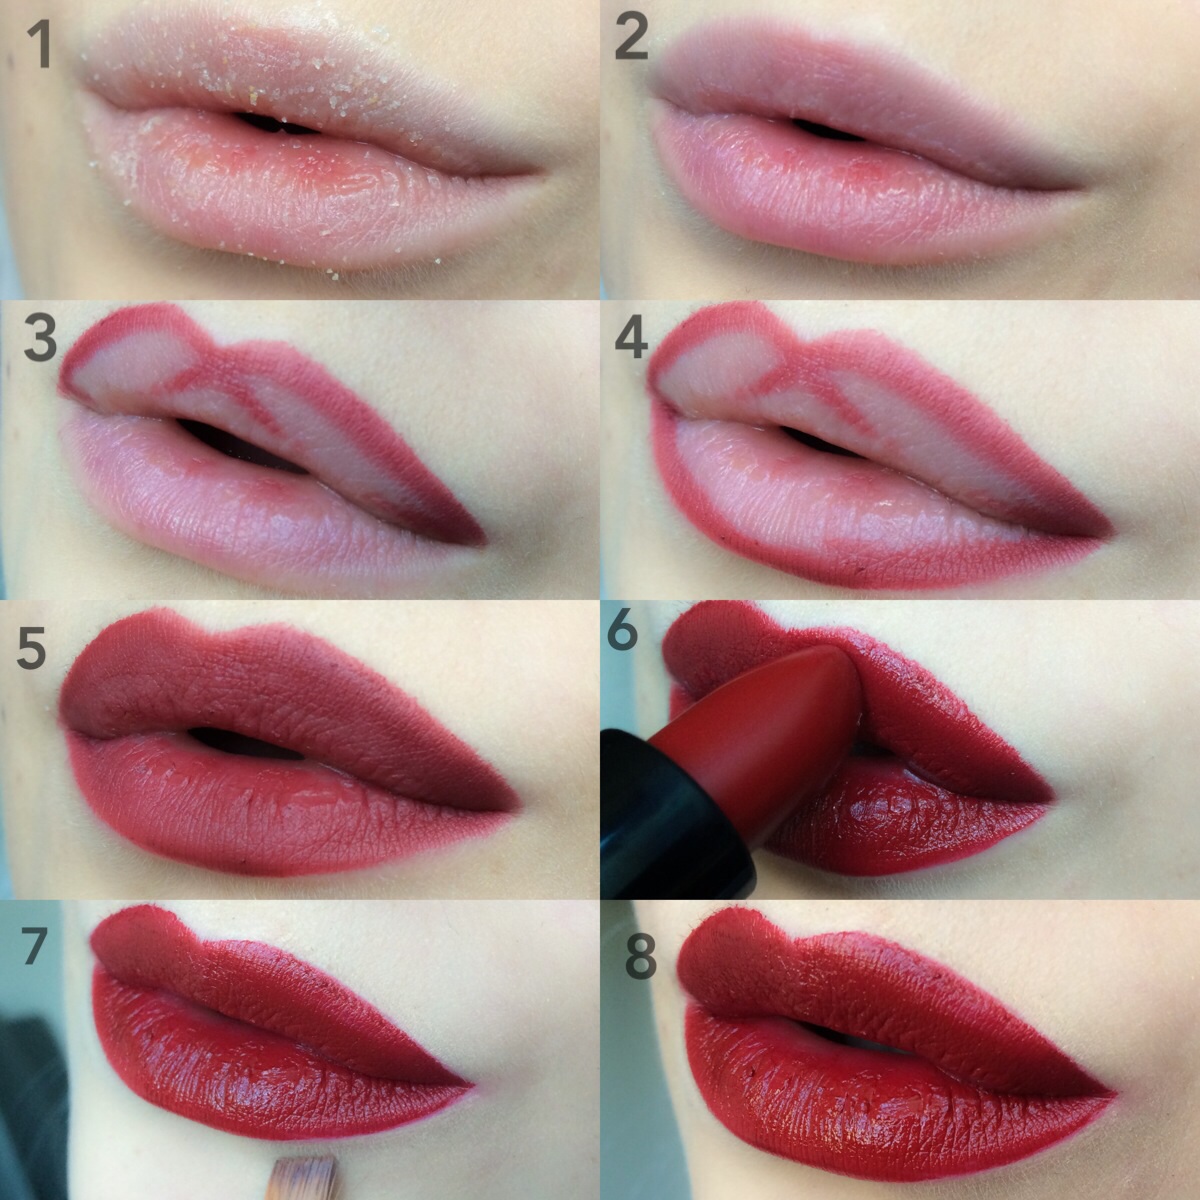 BlogForShops beauty tips&tricks the perfect red lips Photocredits Punchingpictures